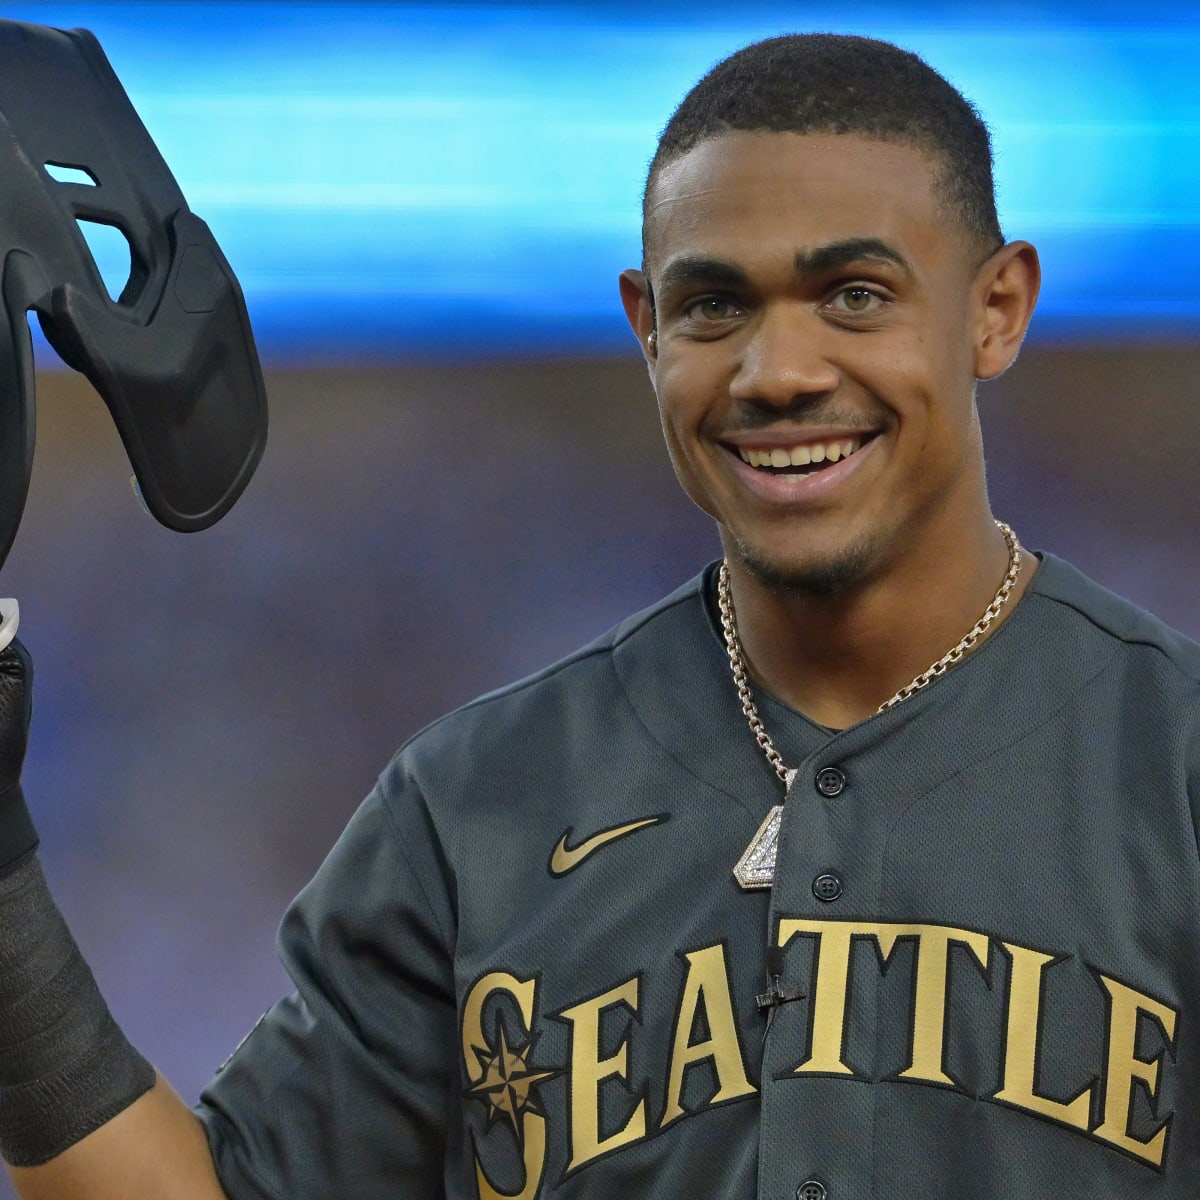 How Mariners rookie Julio Rodríguez became the new 'king of